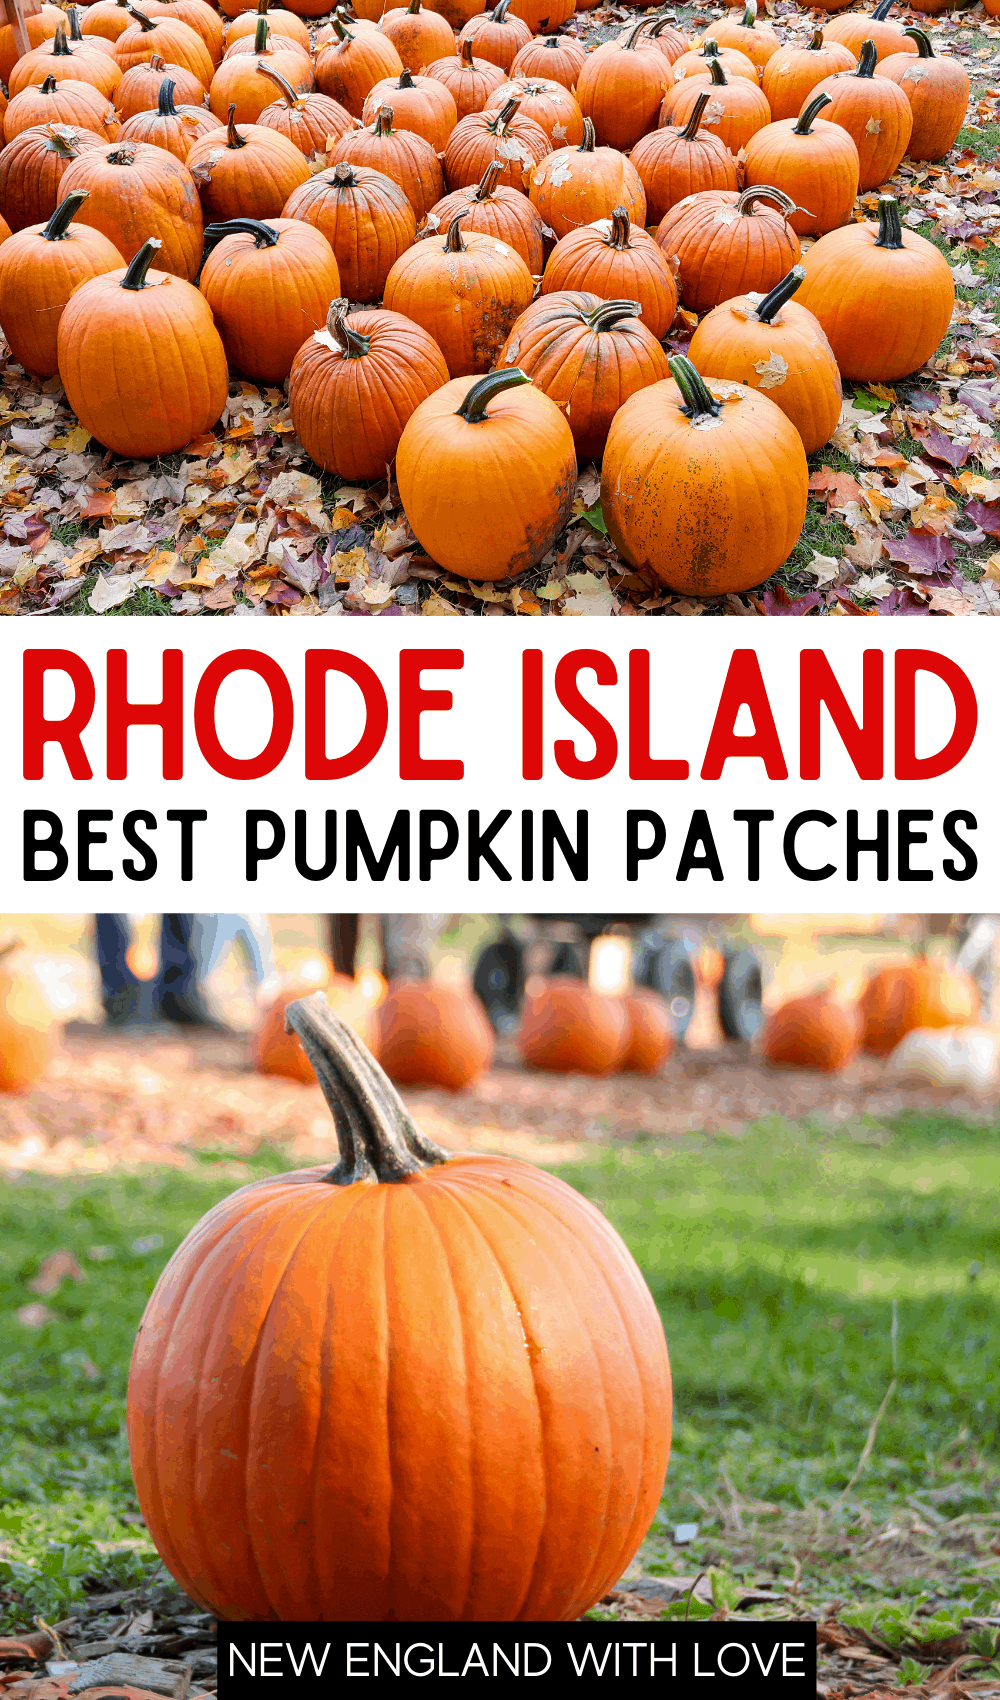 Pinterest graphic reading "RHODE ISLAD BEST PUMPKIN PATCHES" with photos of pumpkins above and below the words